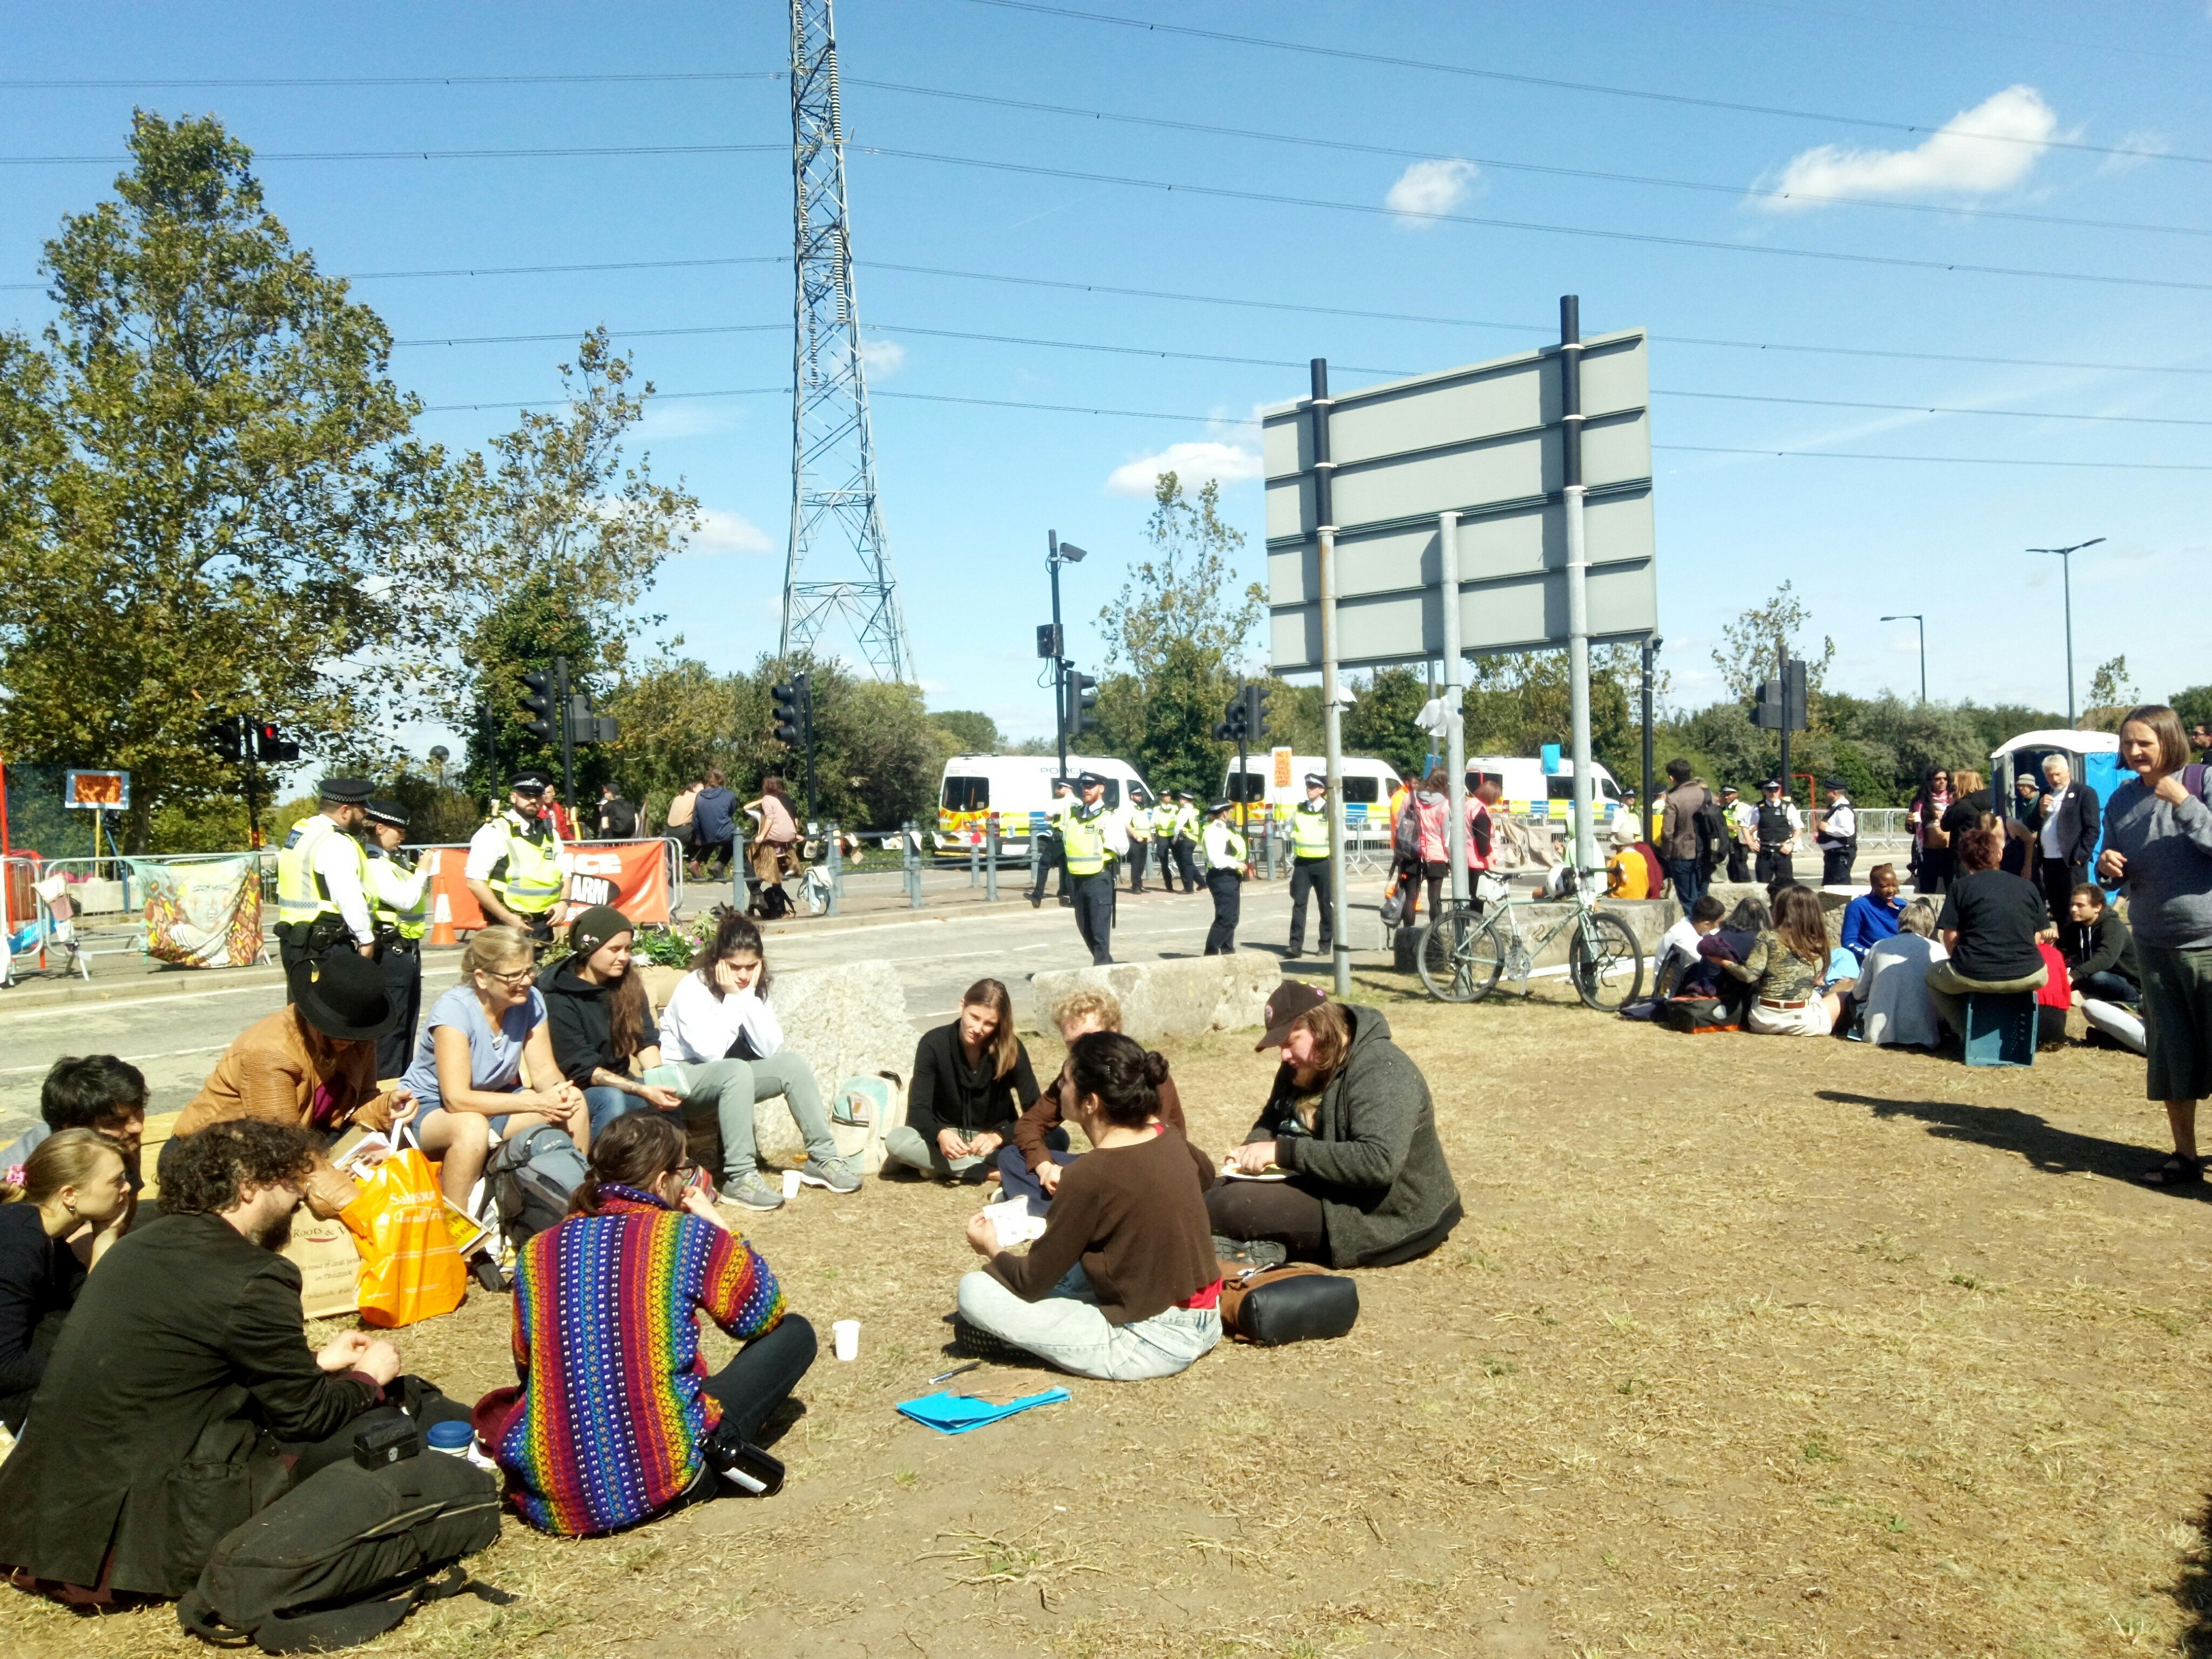 Two groups of people sitting in circles on the ground having discussions. Police are nearby.